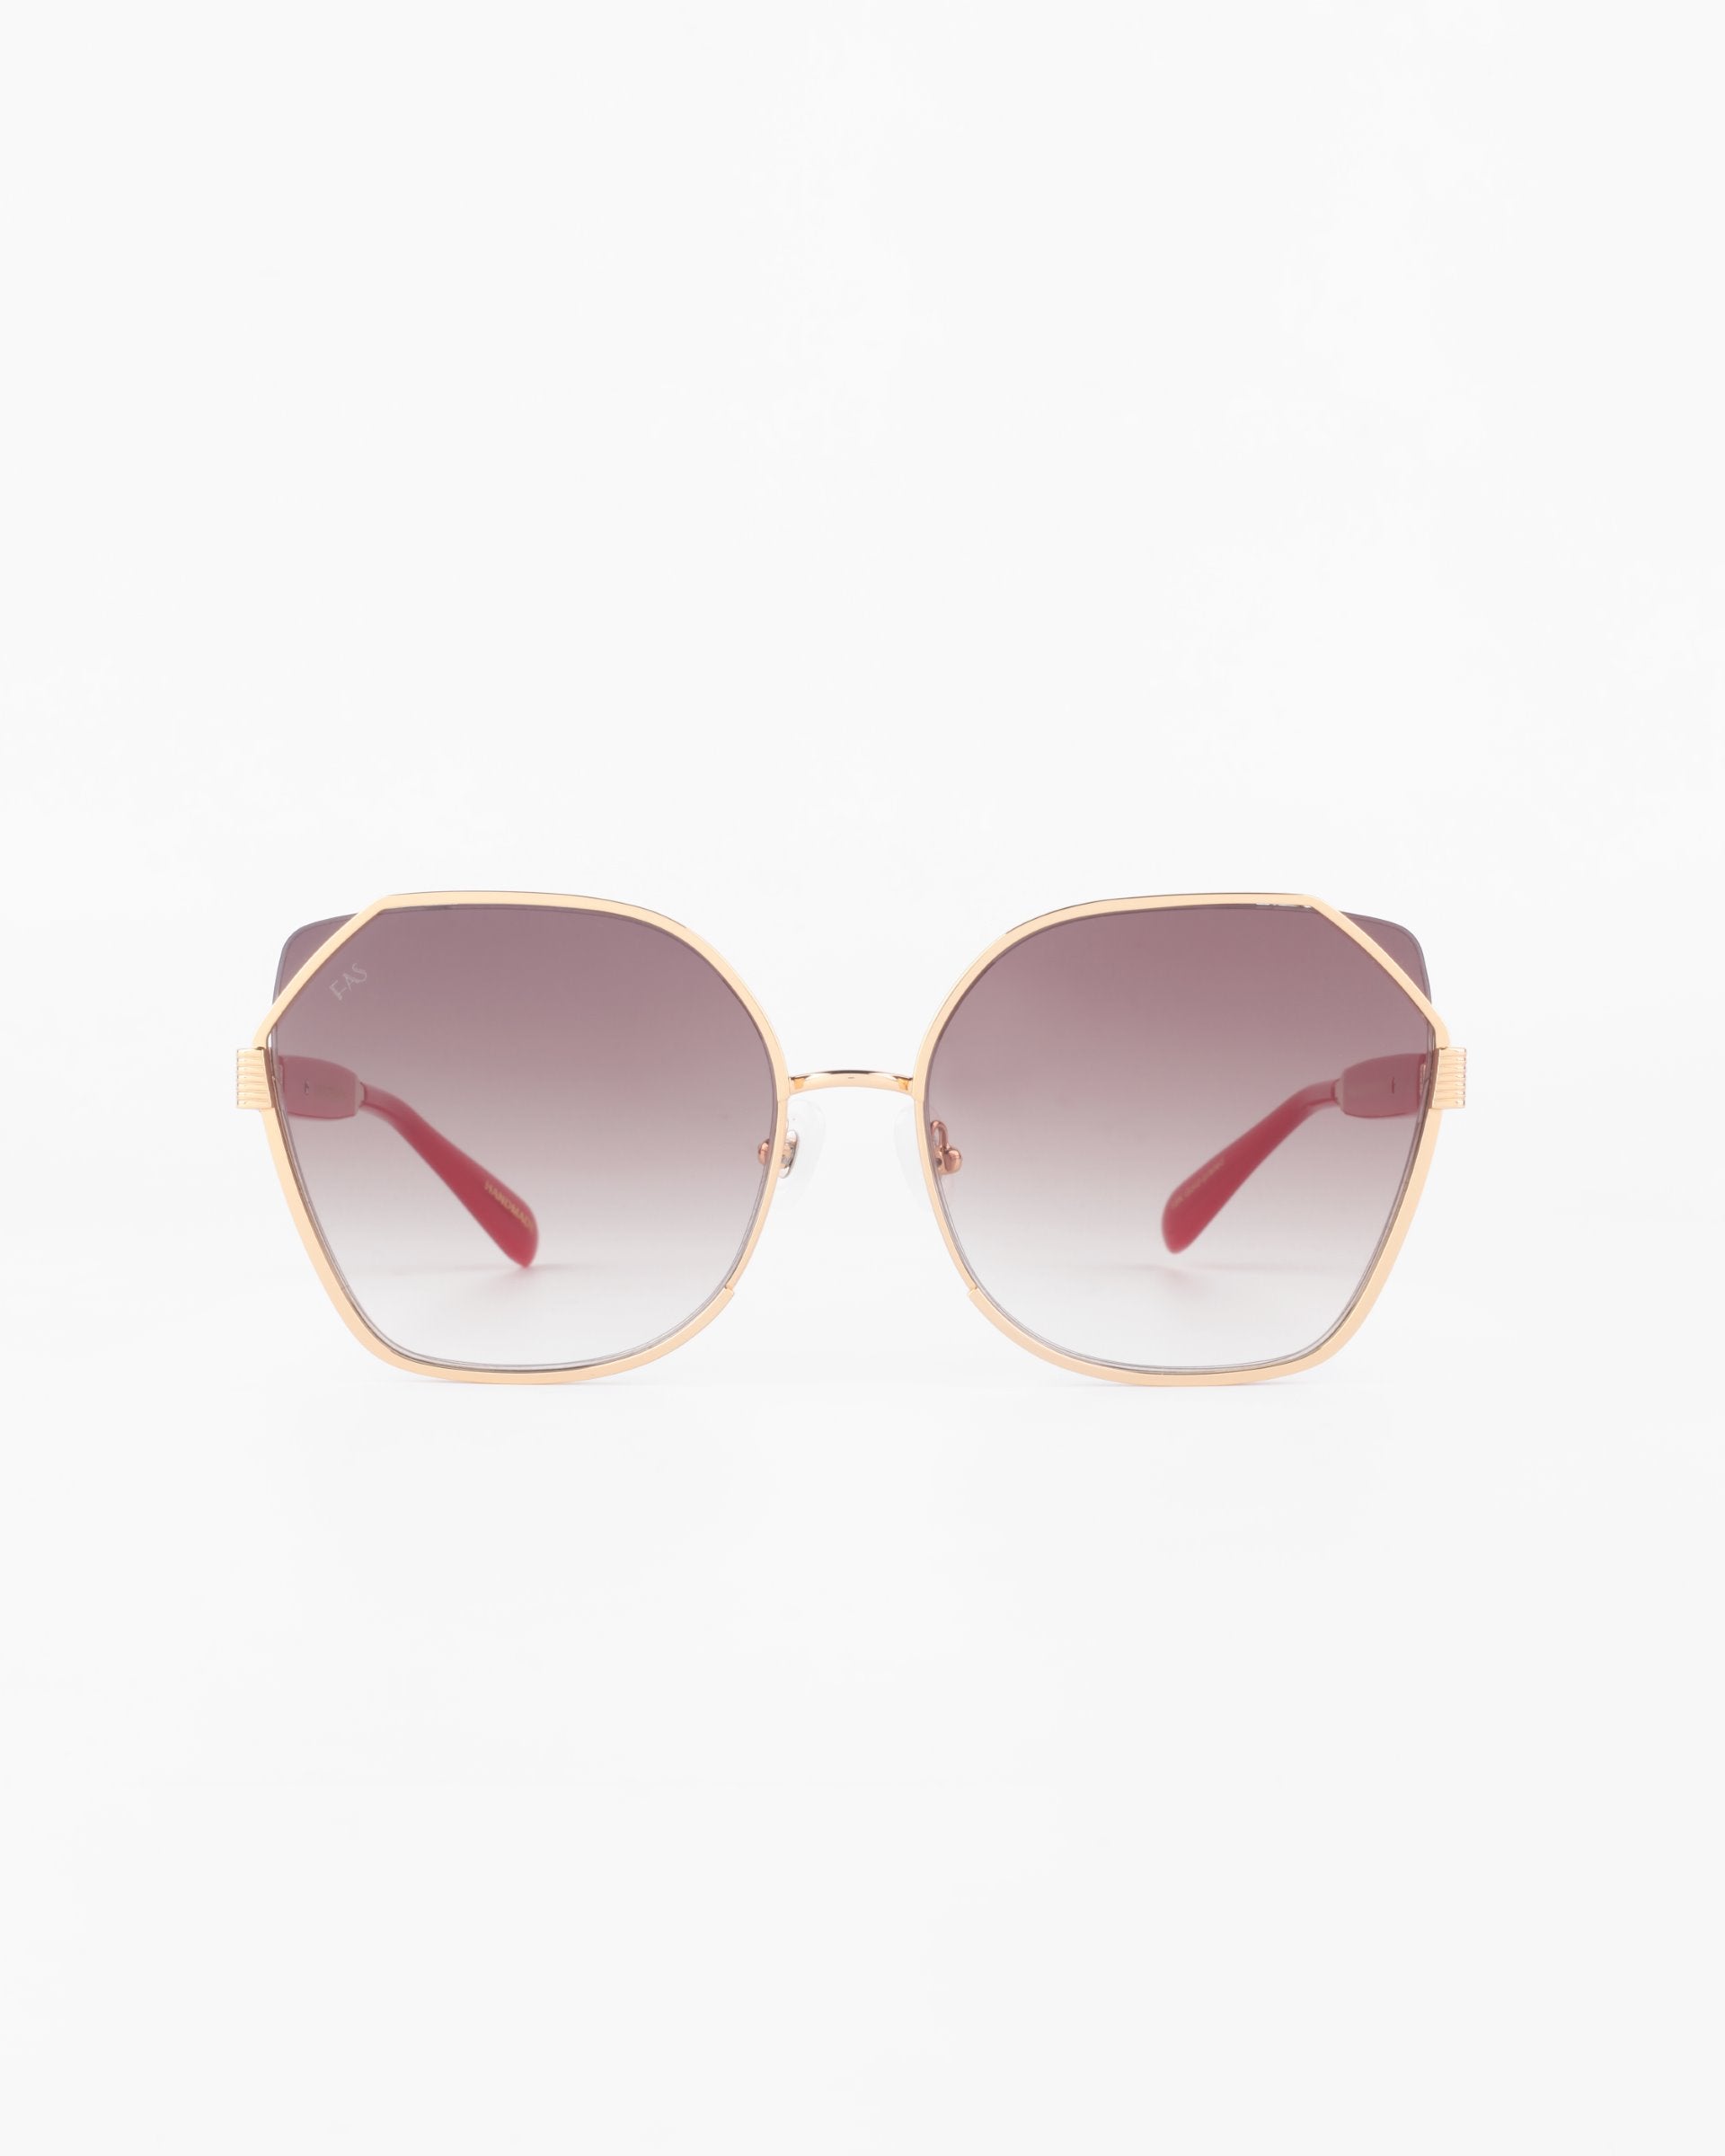 A pair of large, octagonal sunglasses with a gold-plated stainless steel frame and ultra-lightweight nylon lenses that transition from dark at the top to lighter at the bottom. The red-armed Montage by For Art&#39;s Sake® offer 100% UVA &amp; UVB protection. The background is plain white.